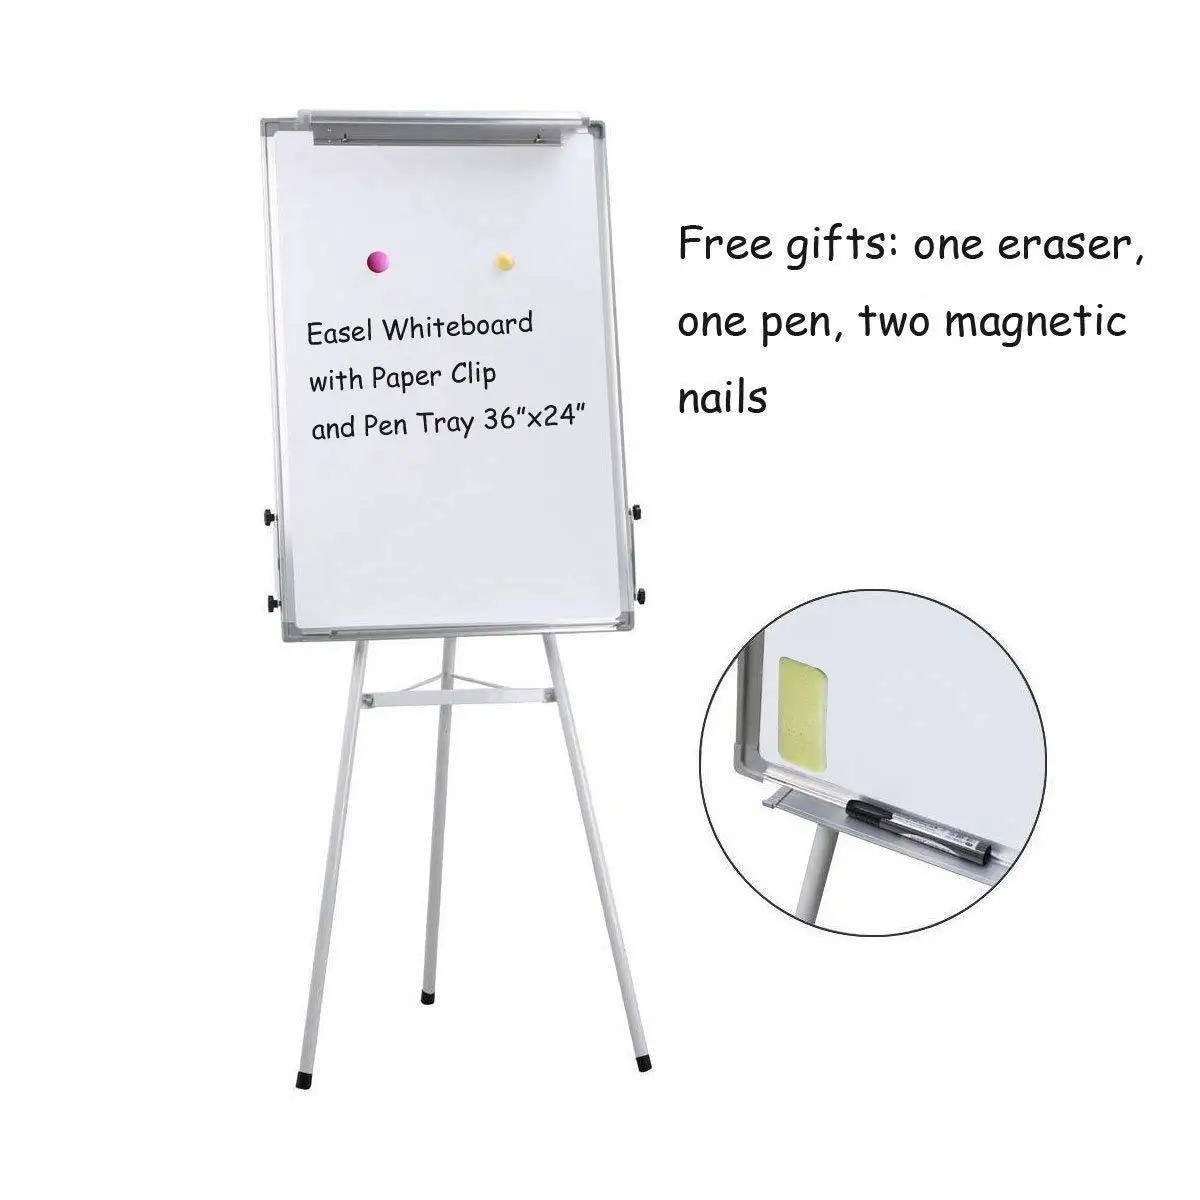 Portable Flip Chart Easel Stand